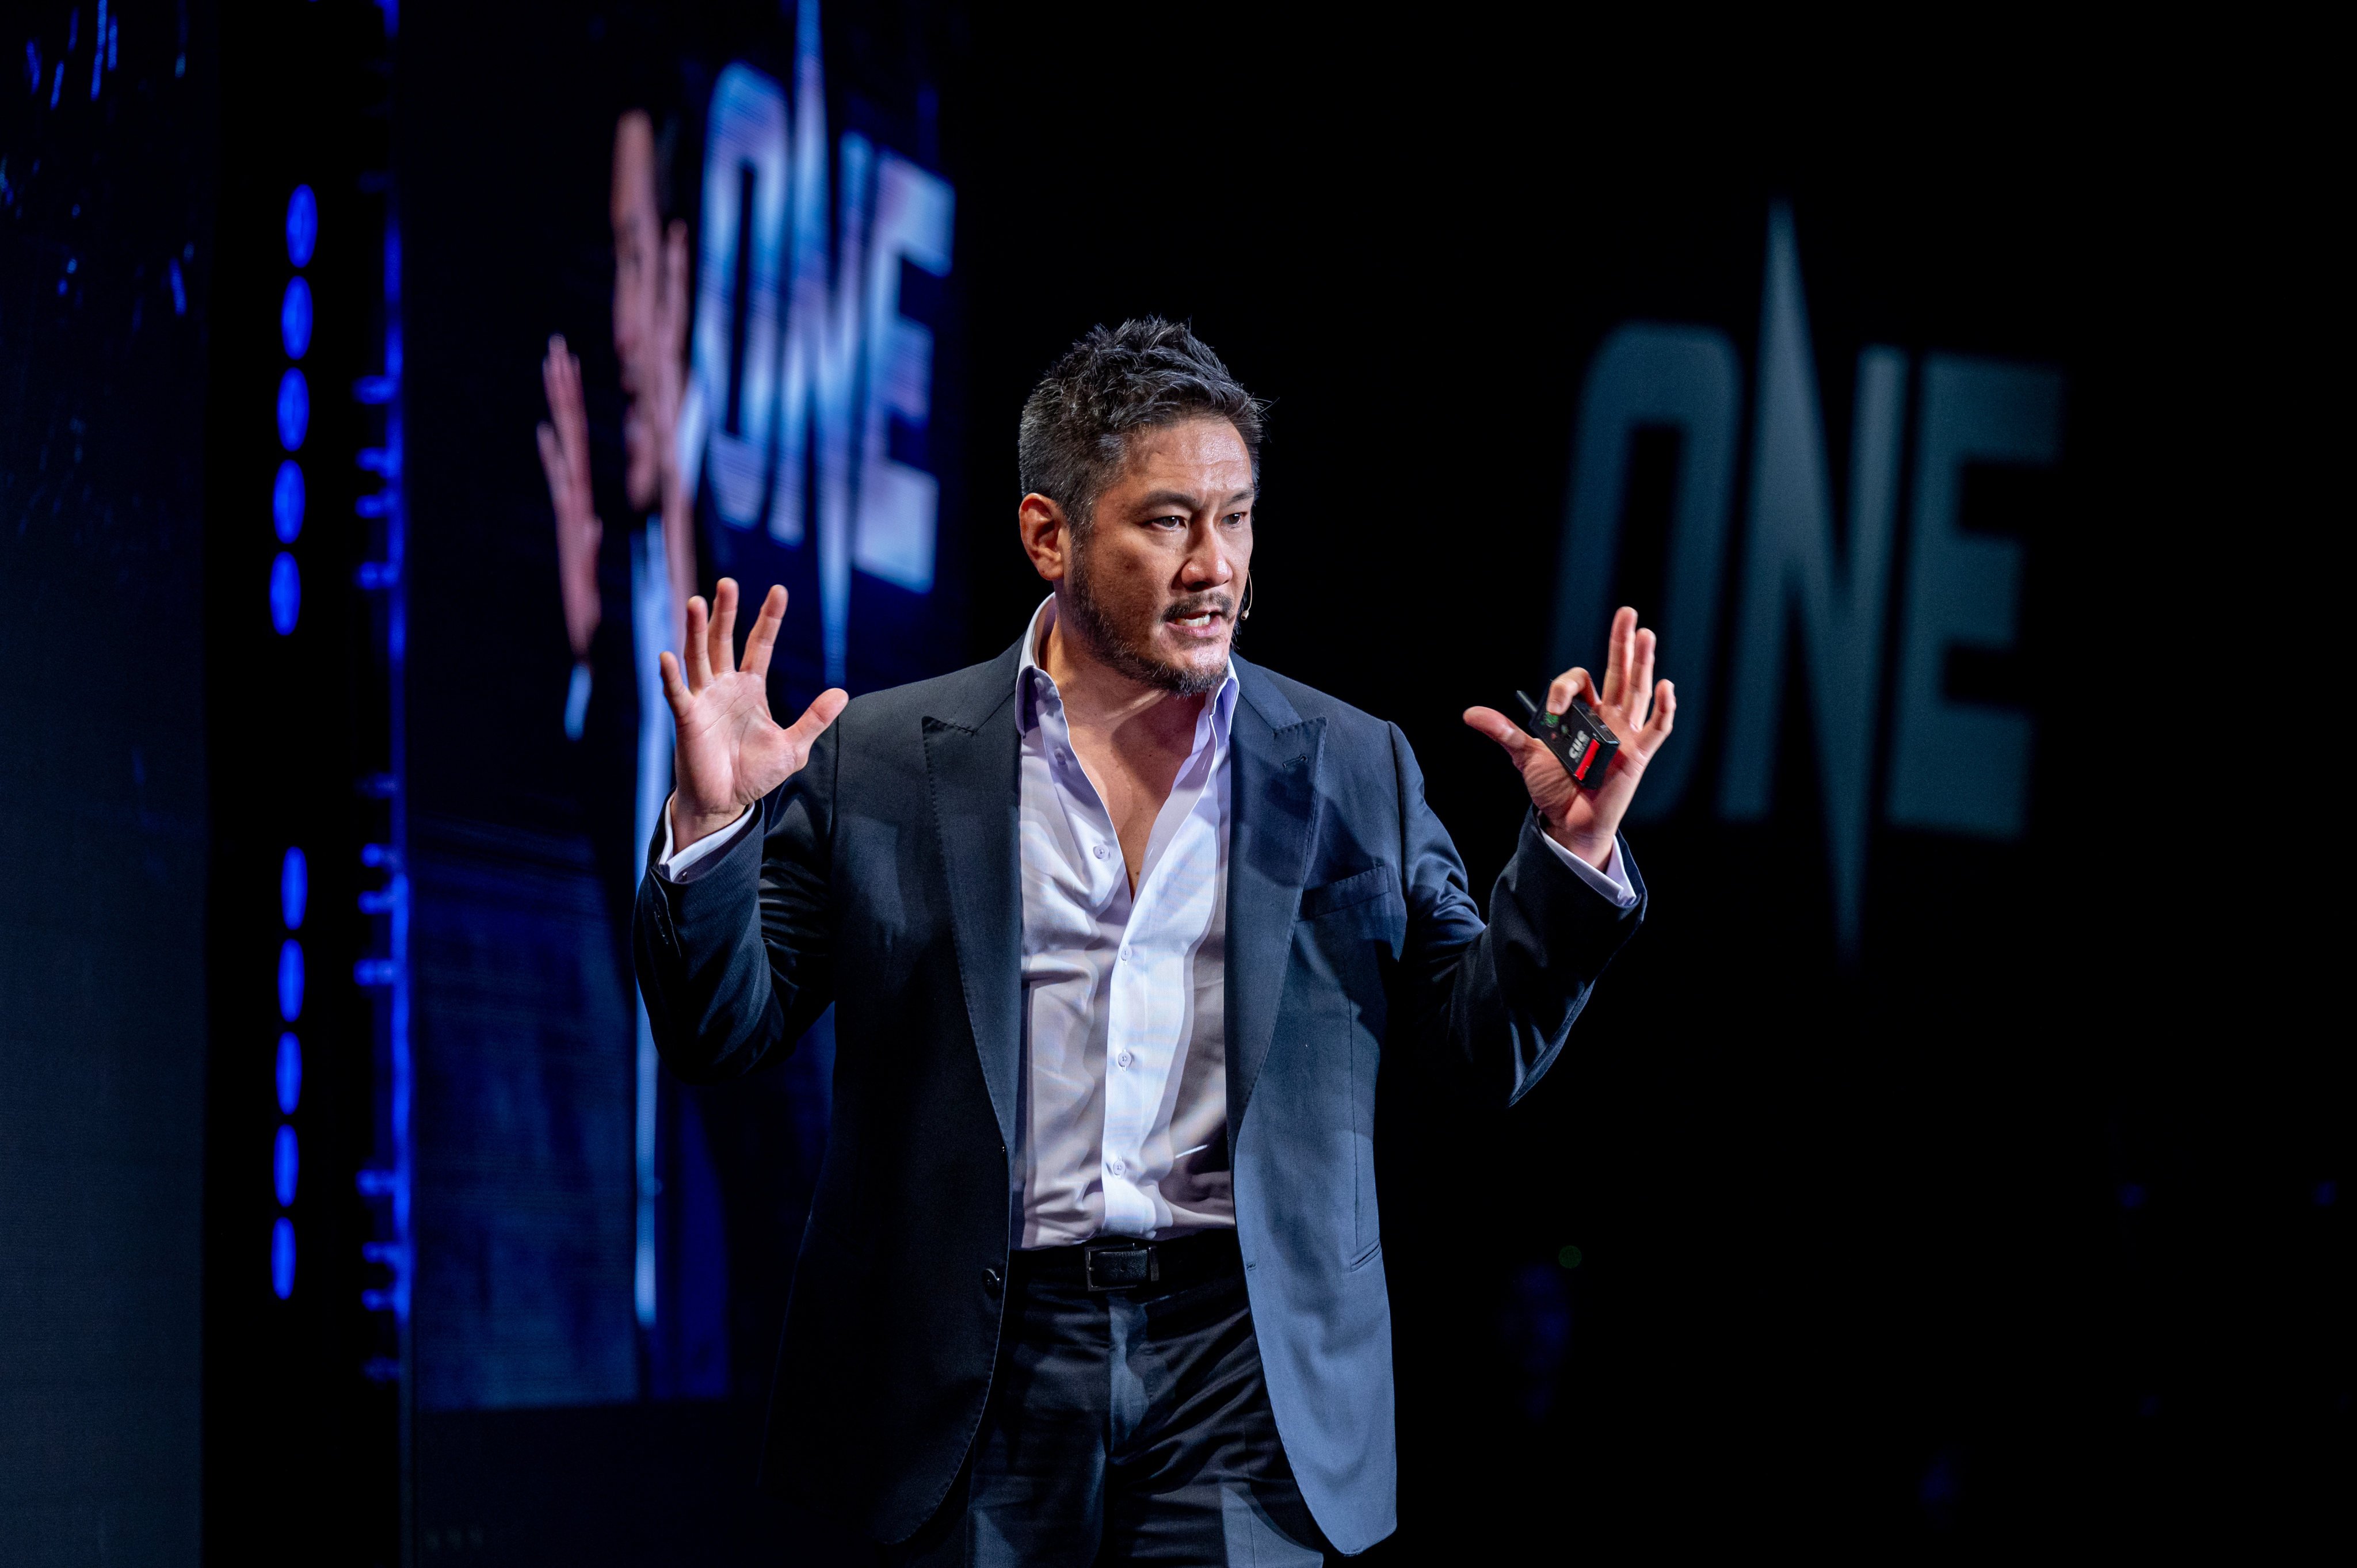 ONE Championship CEO Chatri Sityodtong says his plans for the promotion are ‘like chapters in a book’. Photo: ONE Championship